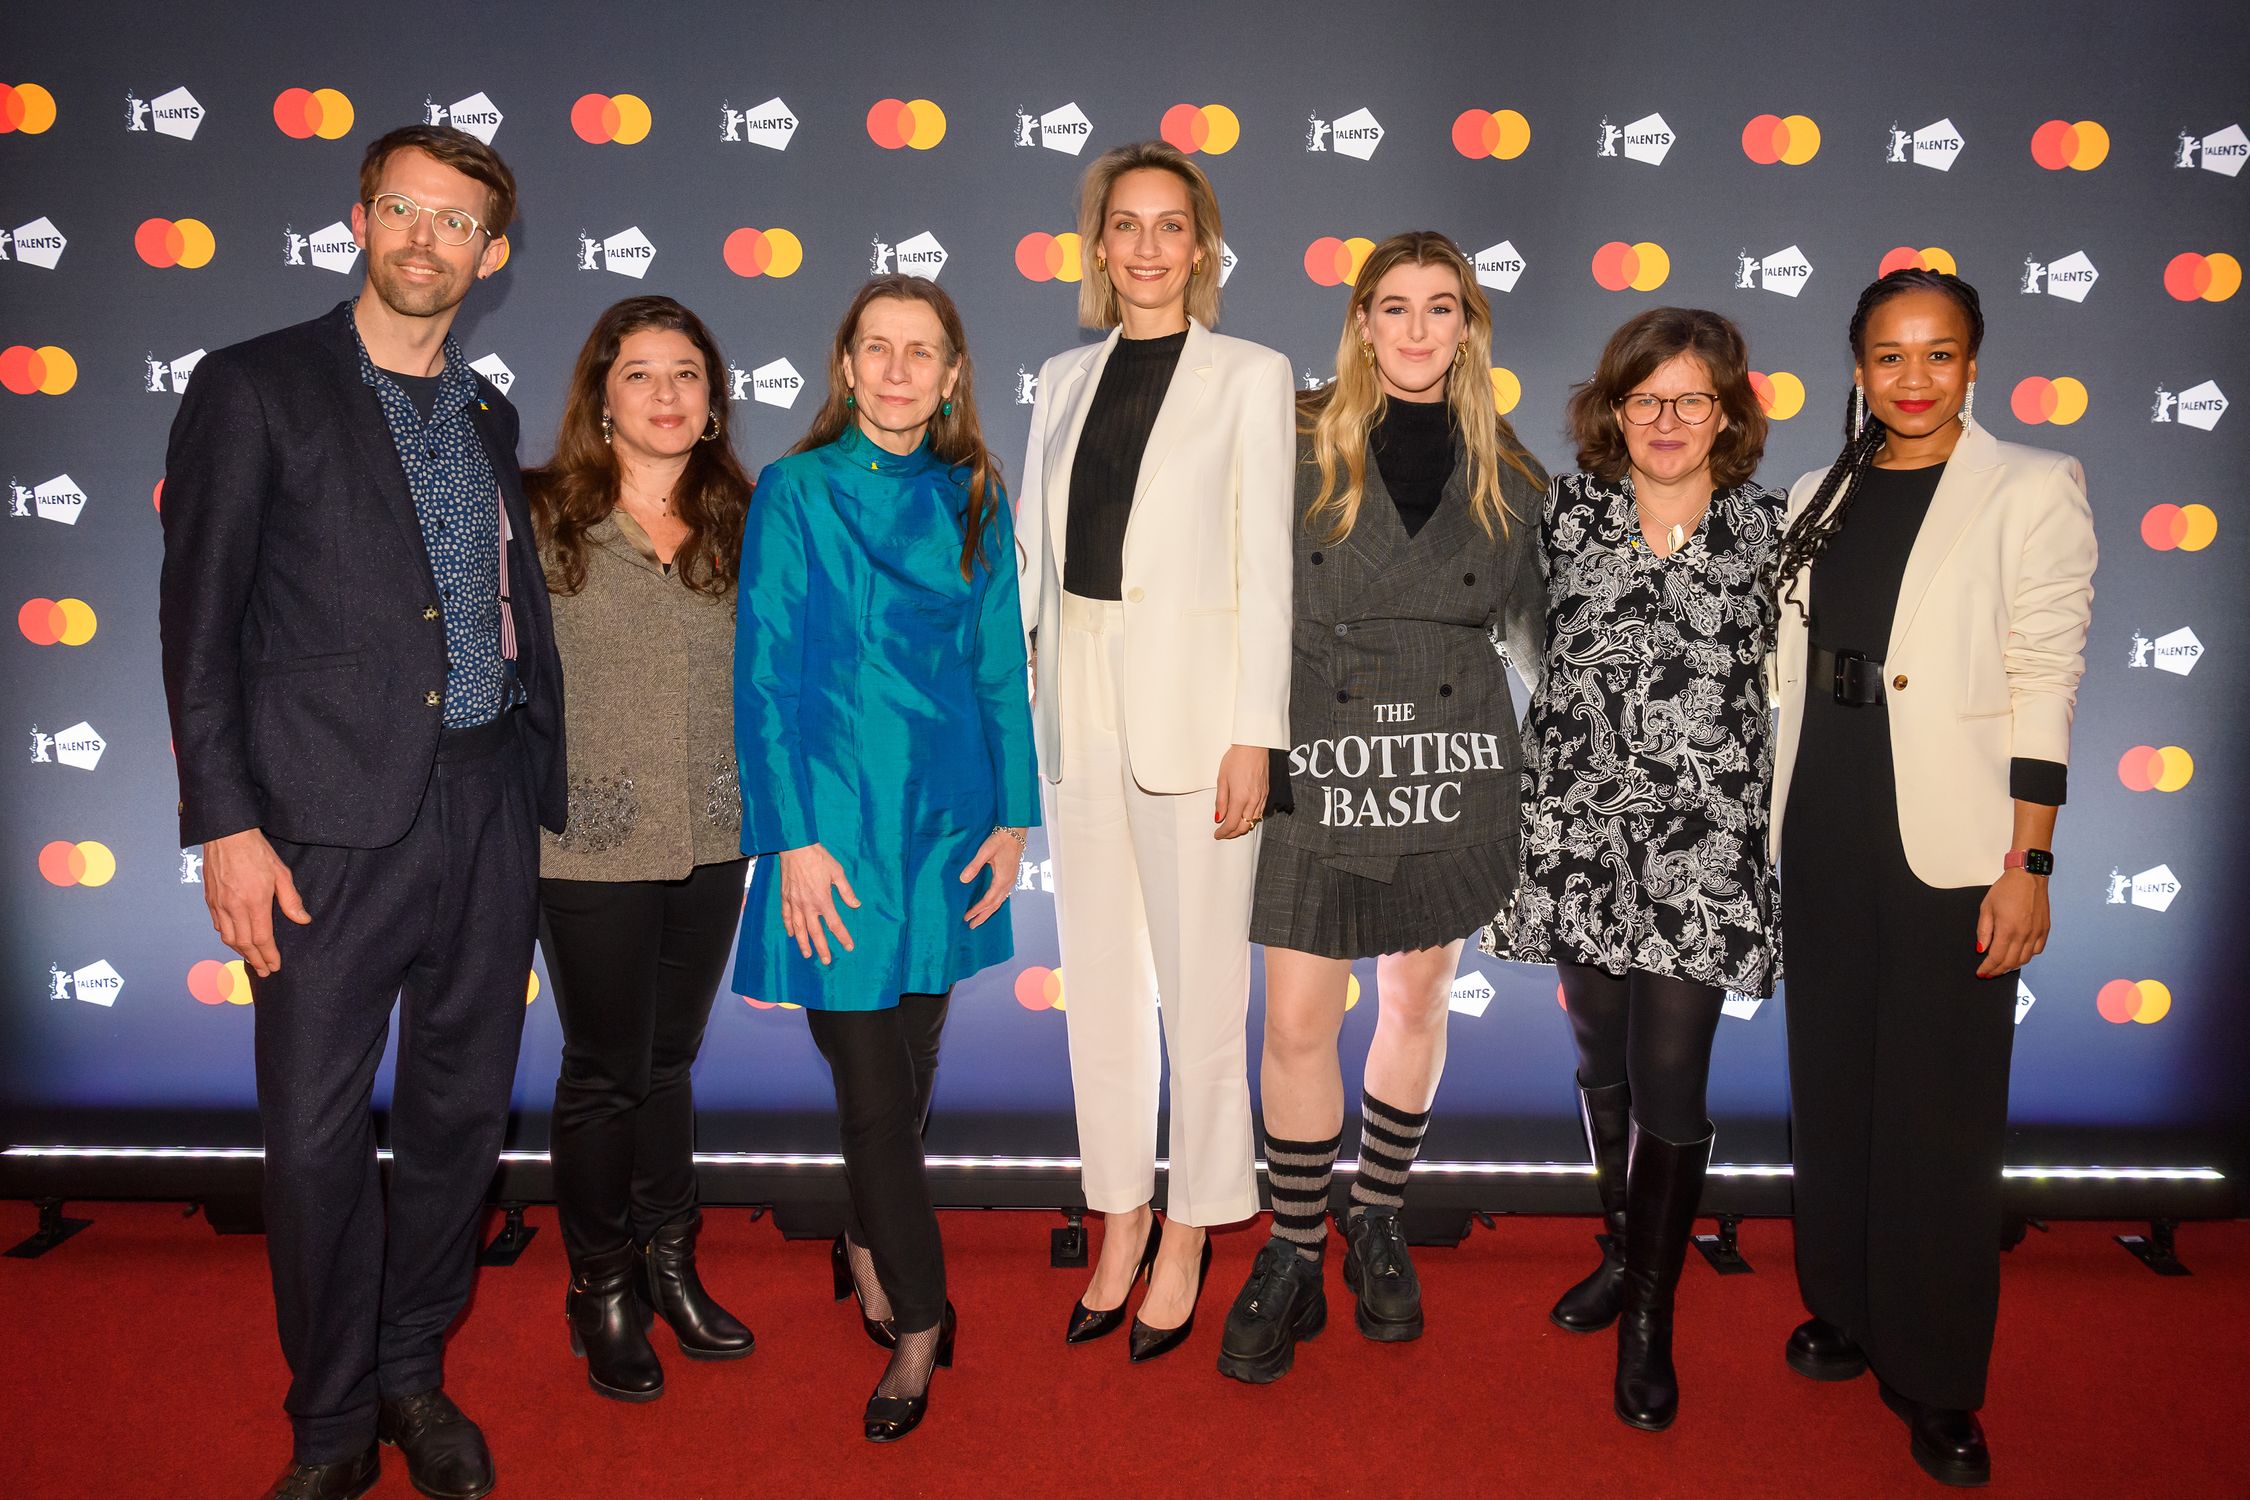 The Berlinale\'s Florian Weghorn, Mariette Rissenbeek Christine Tröstrum with the Mastercard Enablement Programme jury Hania Mroué, Marene Arnold and Honor Swinton Byrne, and Mastercard\'s Jennifer Probst at the Dine & Shine.